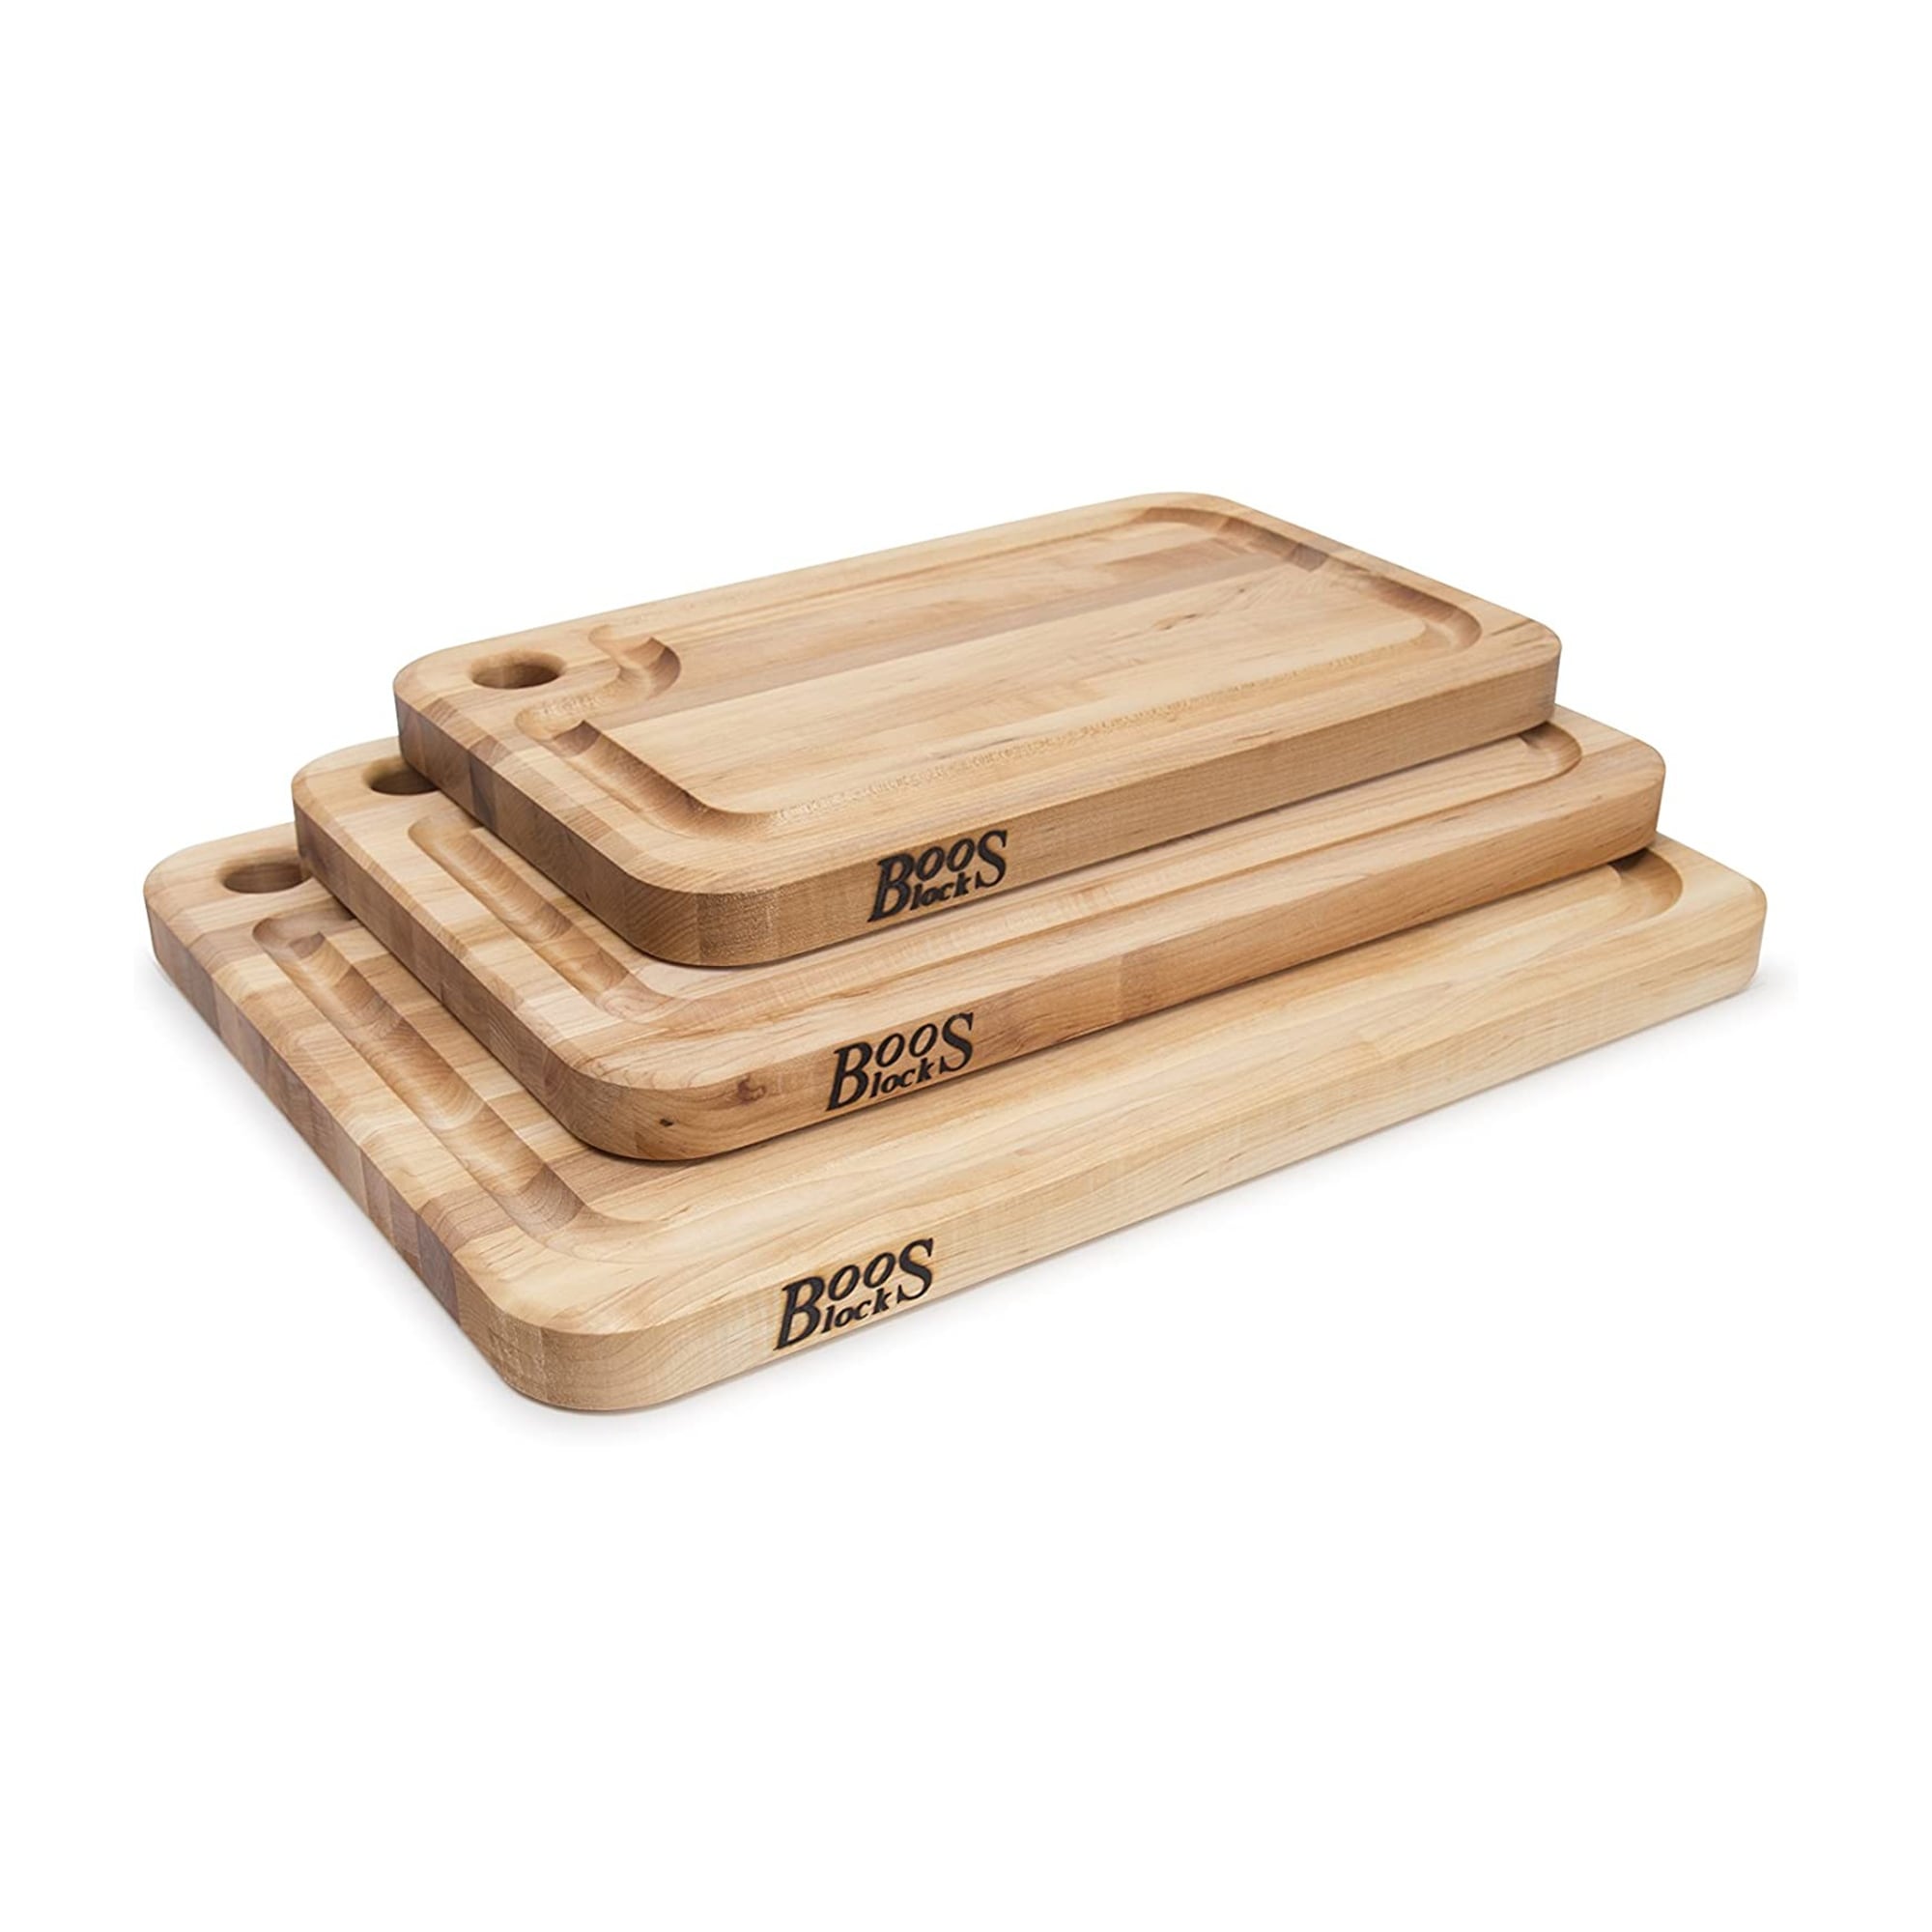 John Boos Maple Wood Cutting Board for Kitchen Prep 24 Inches x 18 Inches,  2.25 Inches Thick Reversible End Grain Rectangular Charcuterie Boos Block